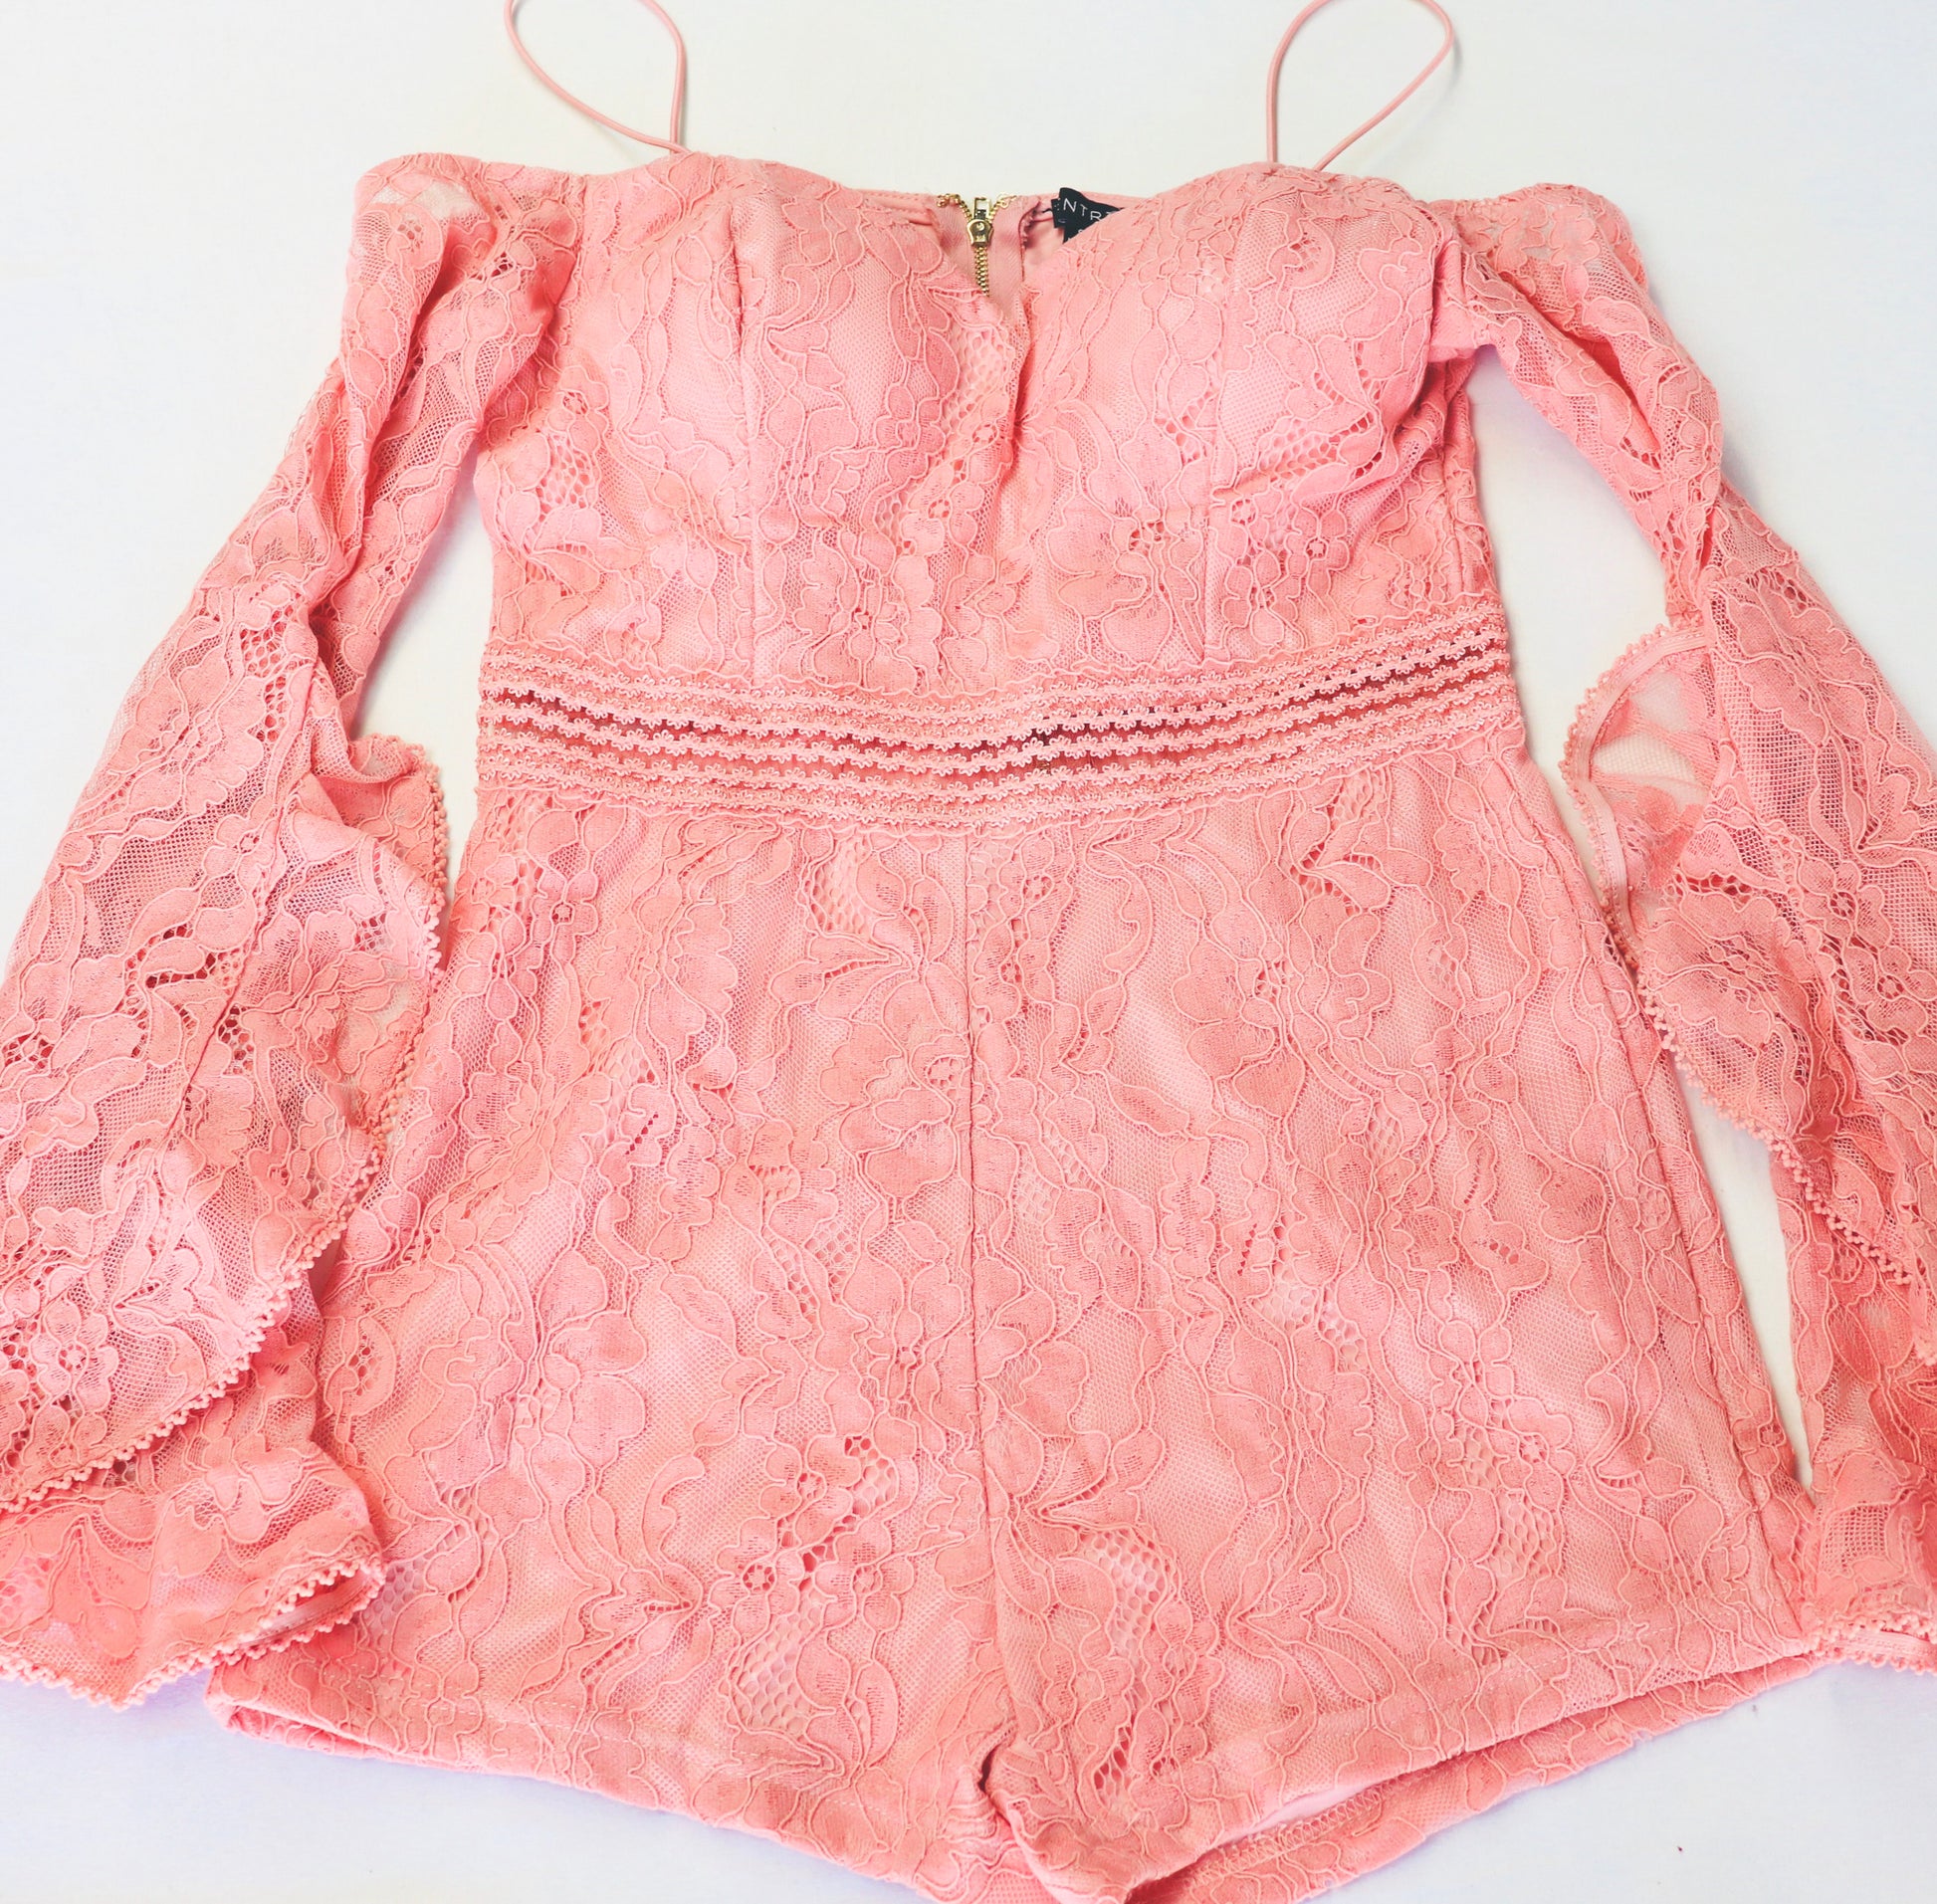 FLIRTY IN PINK OFF THE SHOULDER LACE ROMPER - Alexa Maries